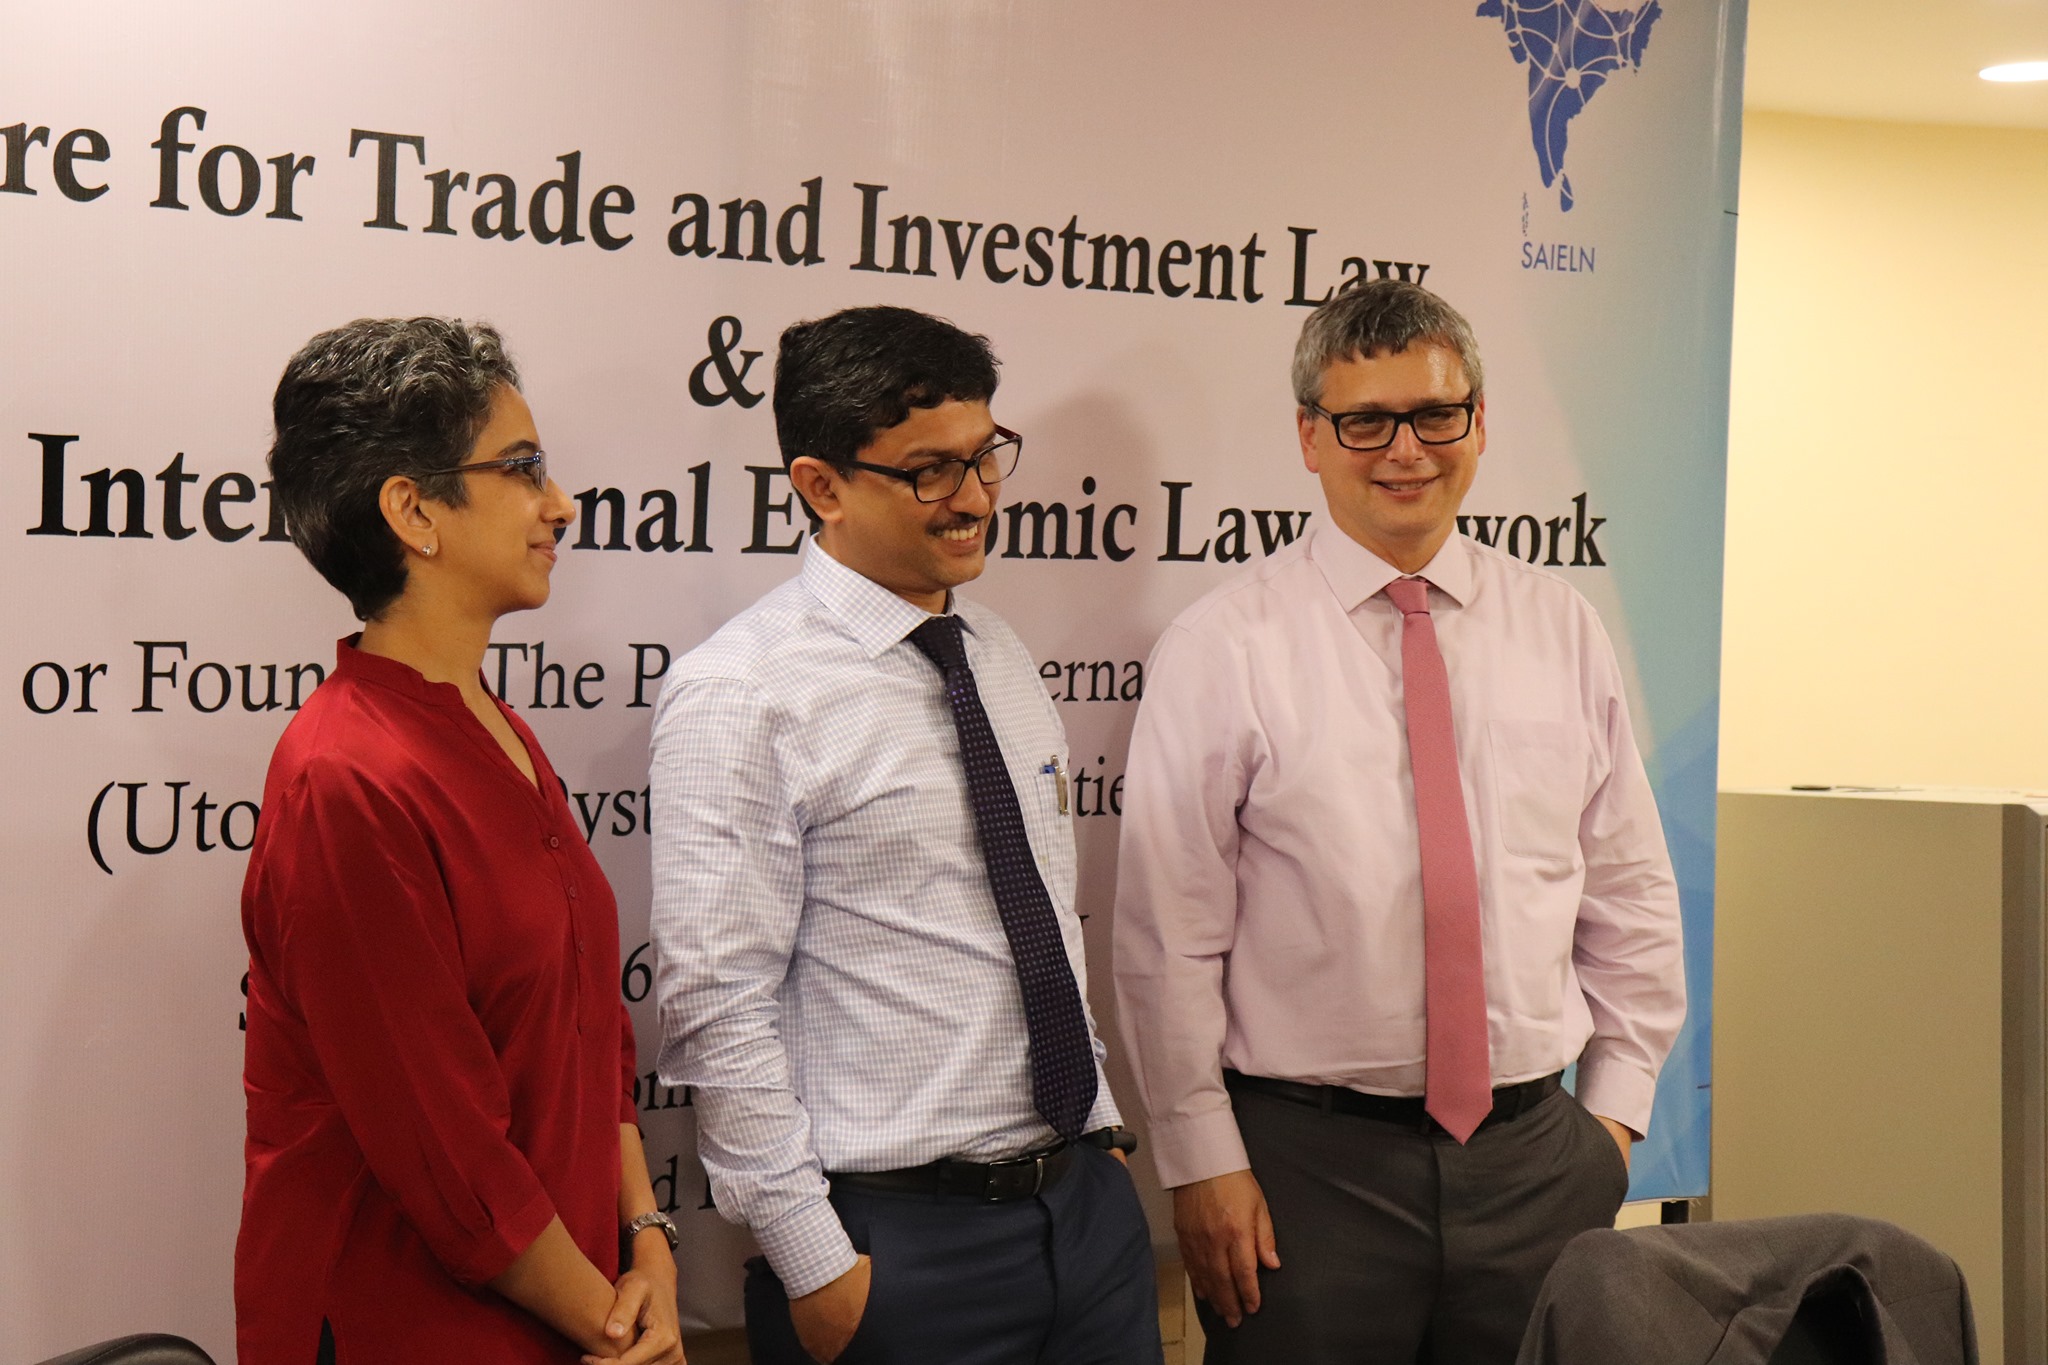 Dr. James with Prof. Picker, University of Wollongong and Ms. RV Anuradha, CLA